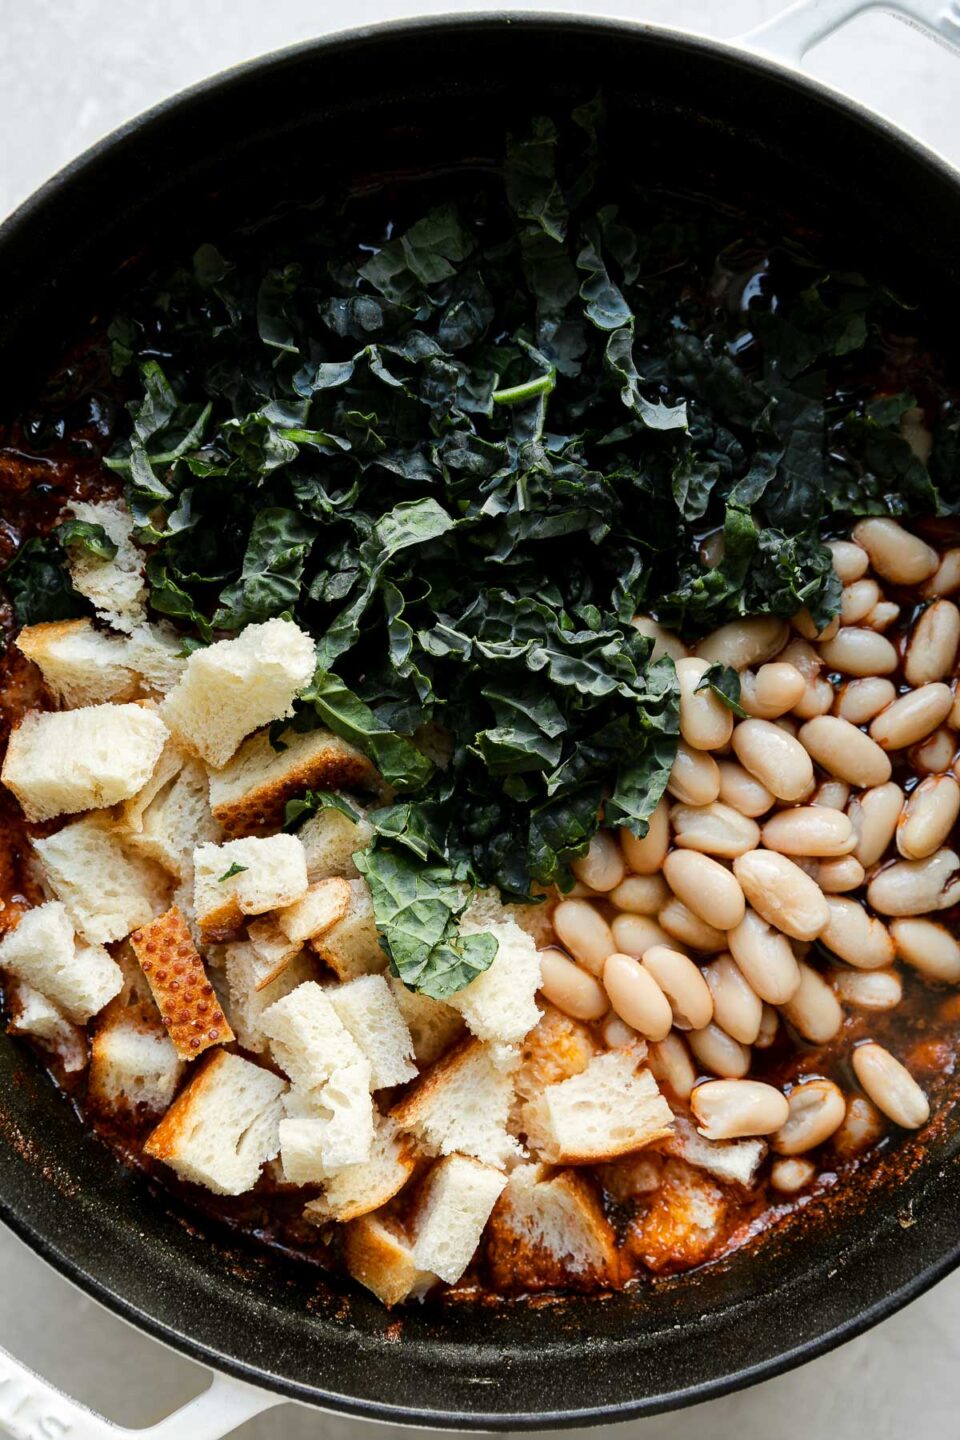 A close up of shredded kale, white cannellini beans, and torn bread are added to Ribollita soup broth within a white Staub cocotte. The cocotte sits atop a creamy white textured surface.